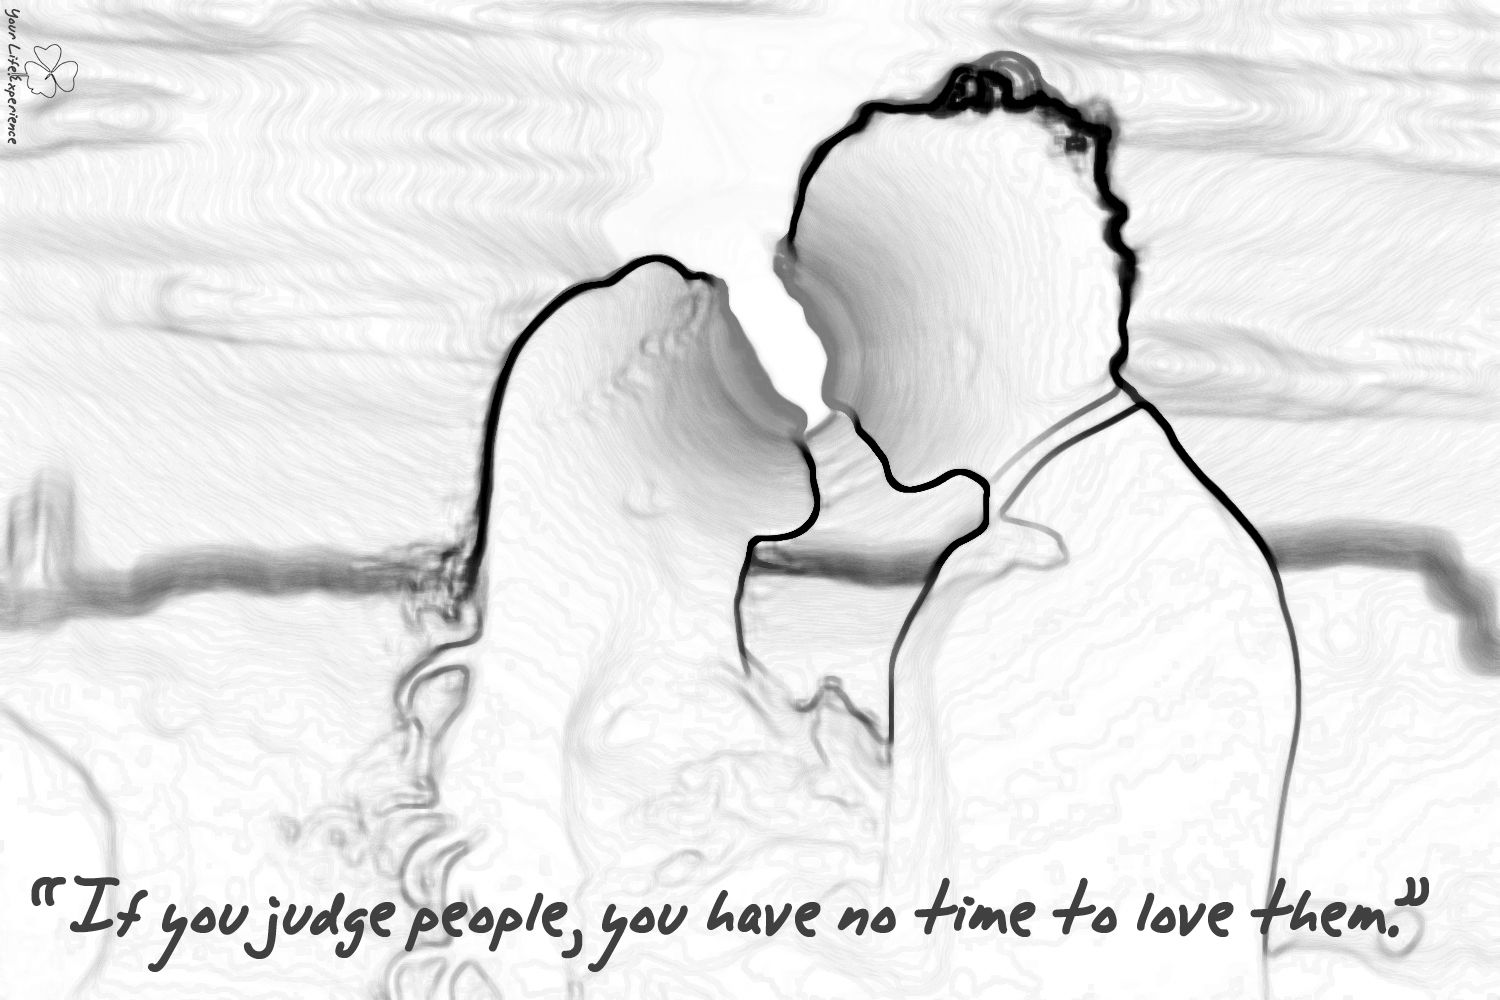 “If you judge people, you have no time to love them.”.jpg